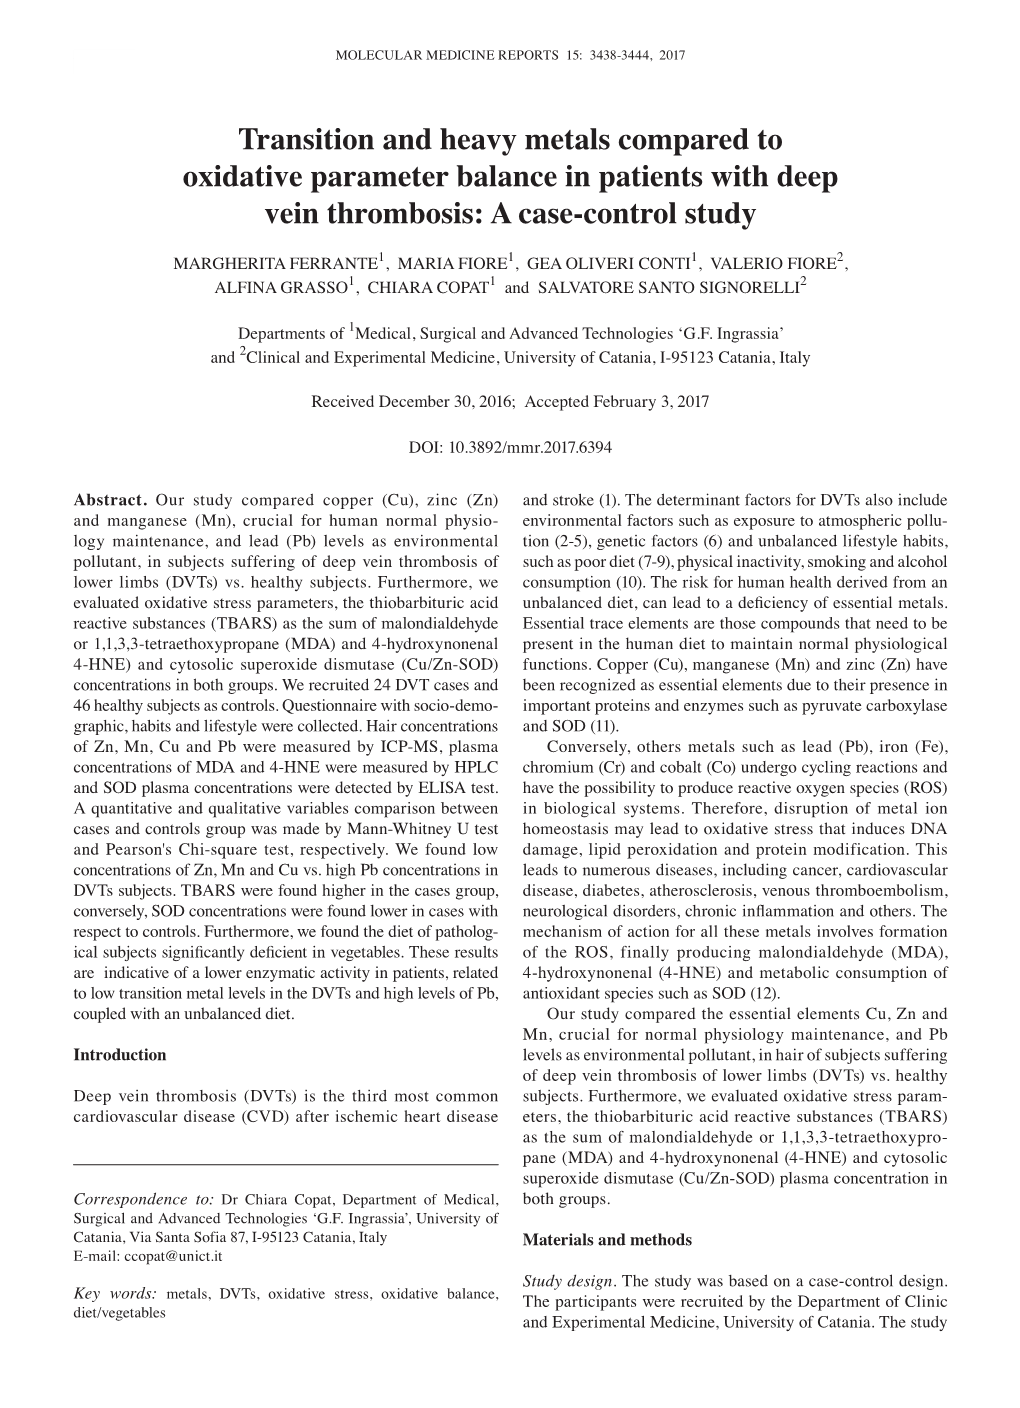 Transition and Heavy Metals Compared to Oxidative Parameter Balance in Patients with Deep Vein Thrombosis: a Case-Control Study